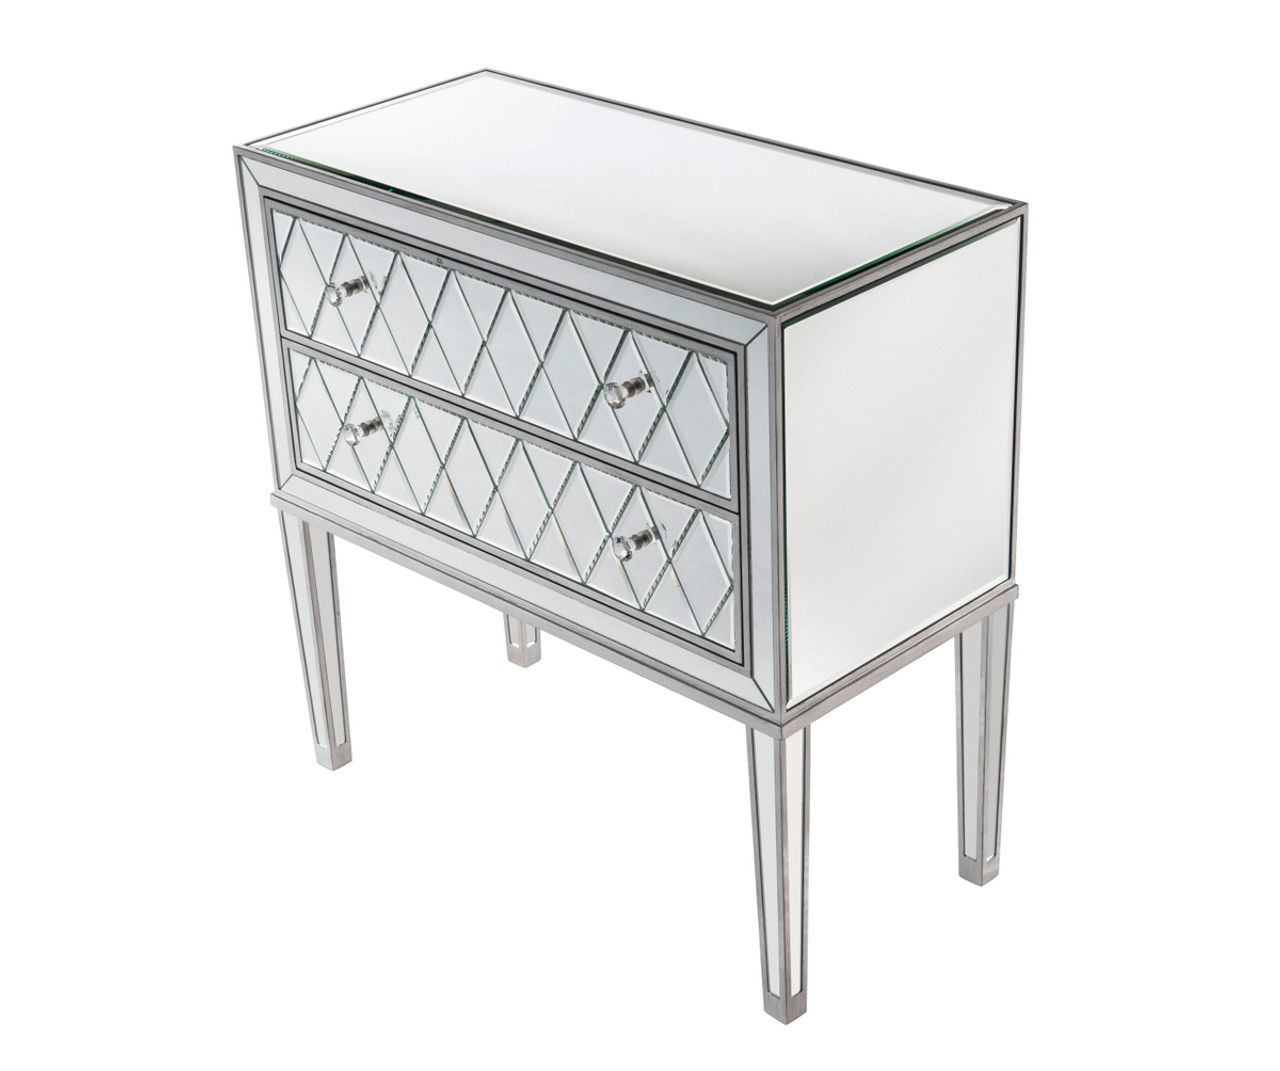 Elegant Decor MF72045 Nightstand 2 drawers 34in. W x 16in. D x 34in. H in antique silver paint